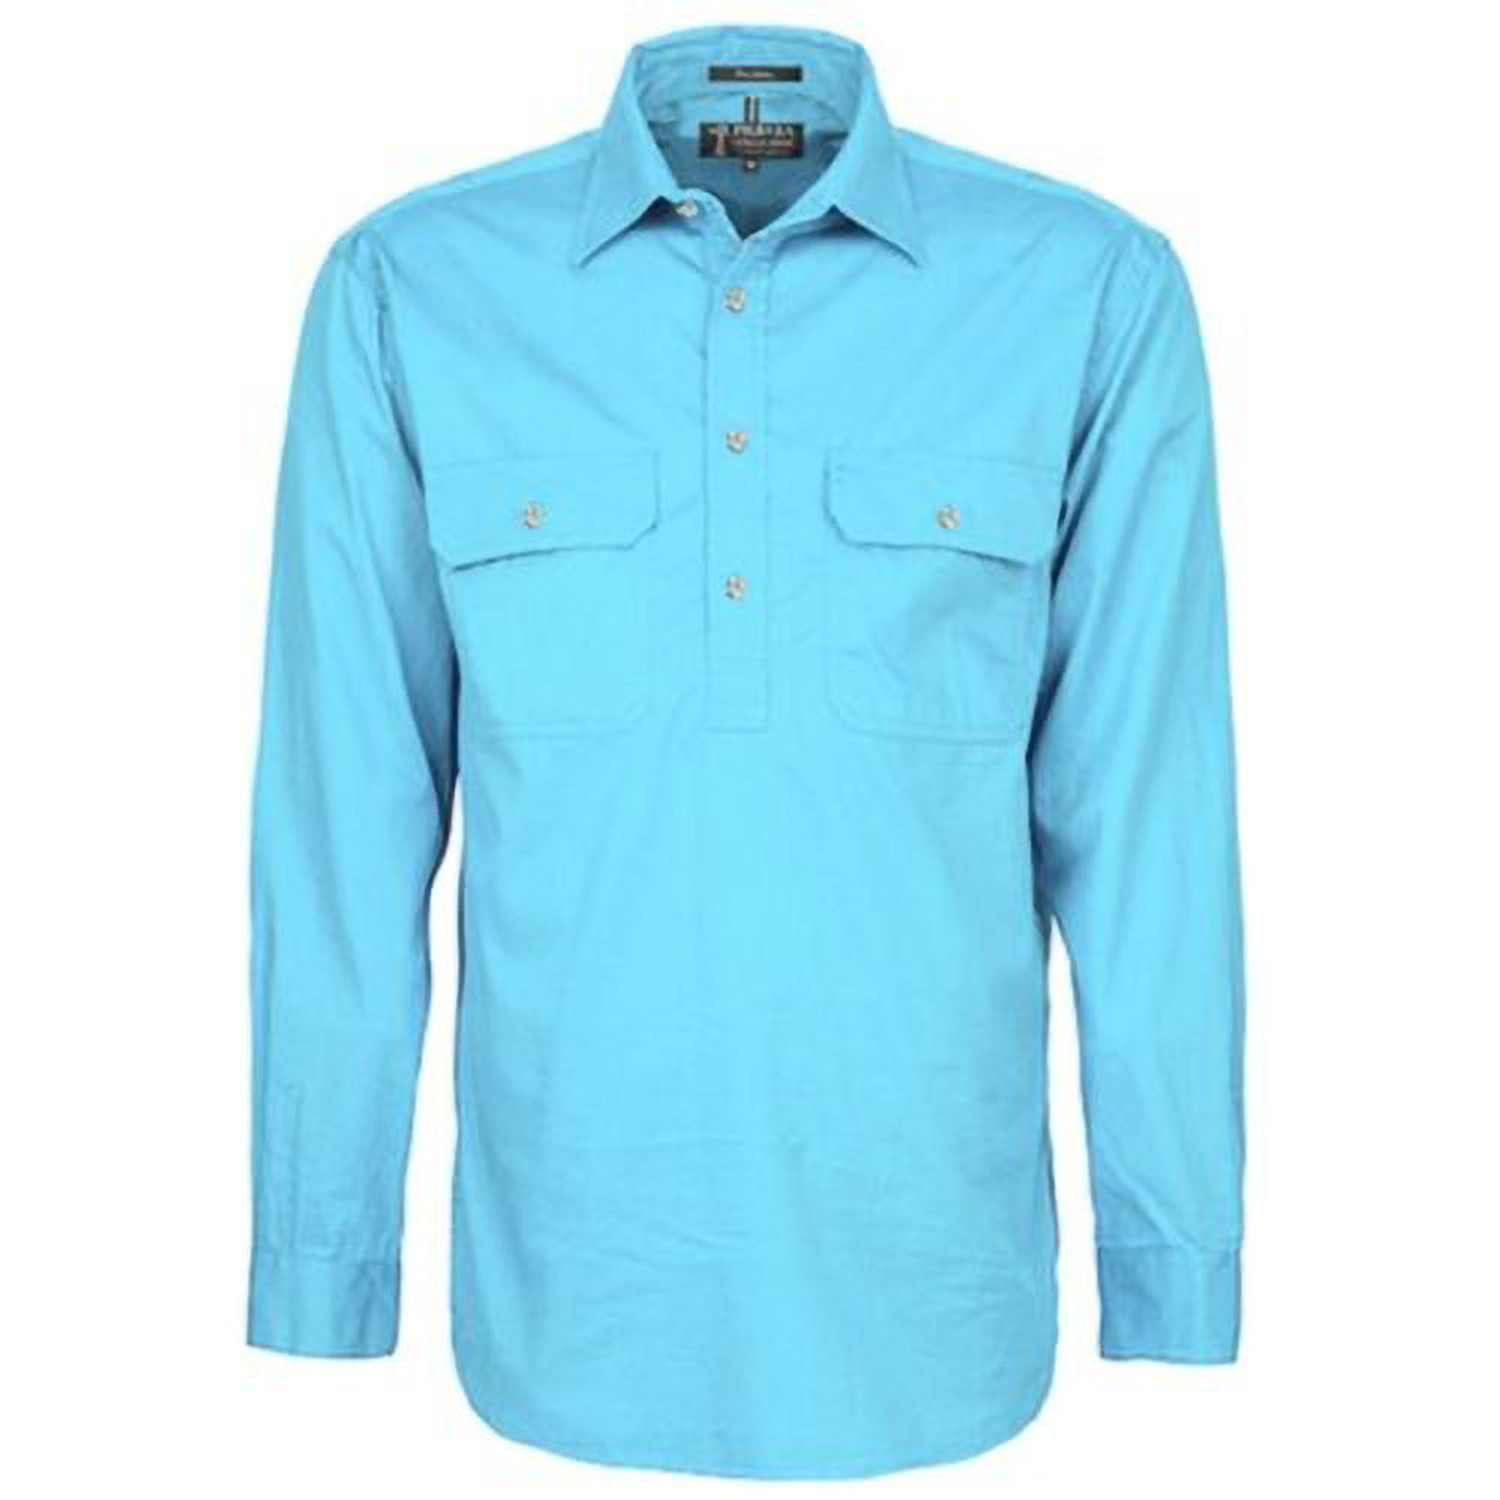 FREE EMBROIDERY - Mens Cornflower CLOSED FRONT Shirt buy 20